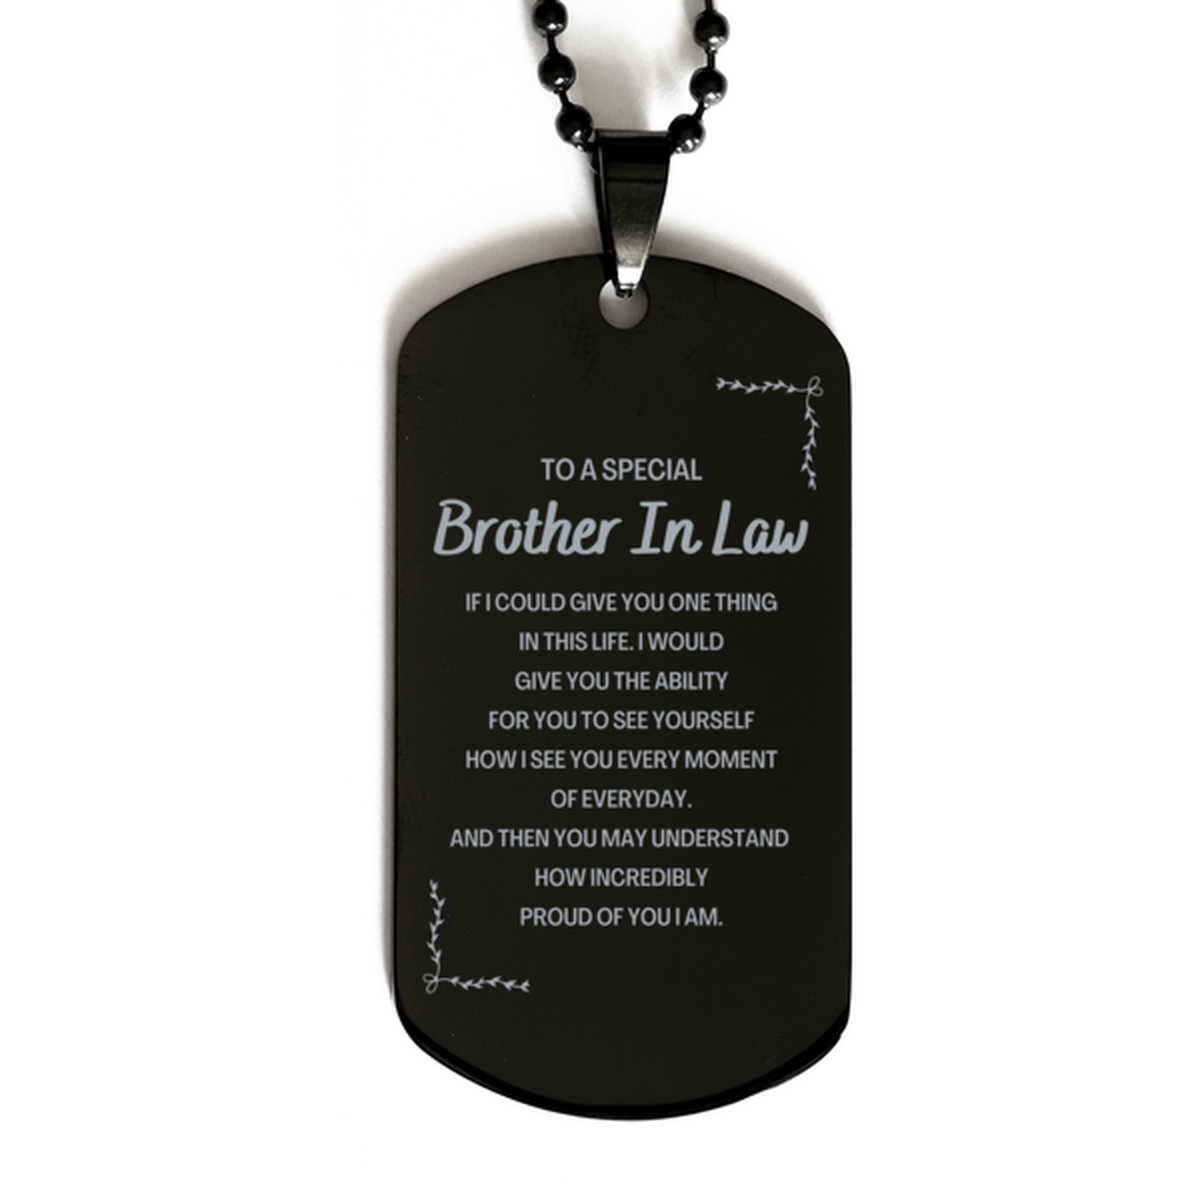 To My Brother In Law Black Dog Tag, Gifts For Brother In Law Engraved, Inspirational Gifts for Christmas Birthday, Epic Gifts for Brother In Law To A Special Brother In Law how incredibly proud of you I am